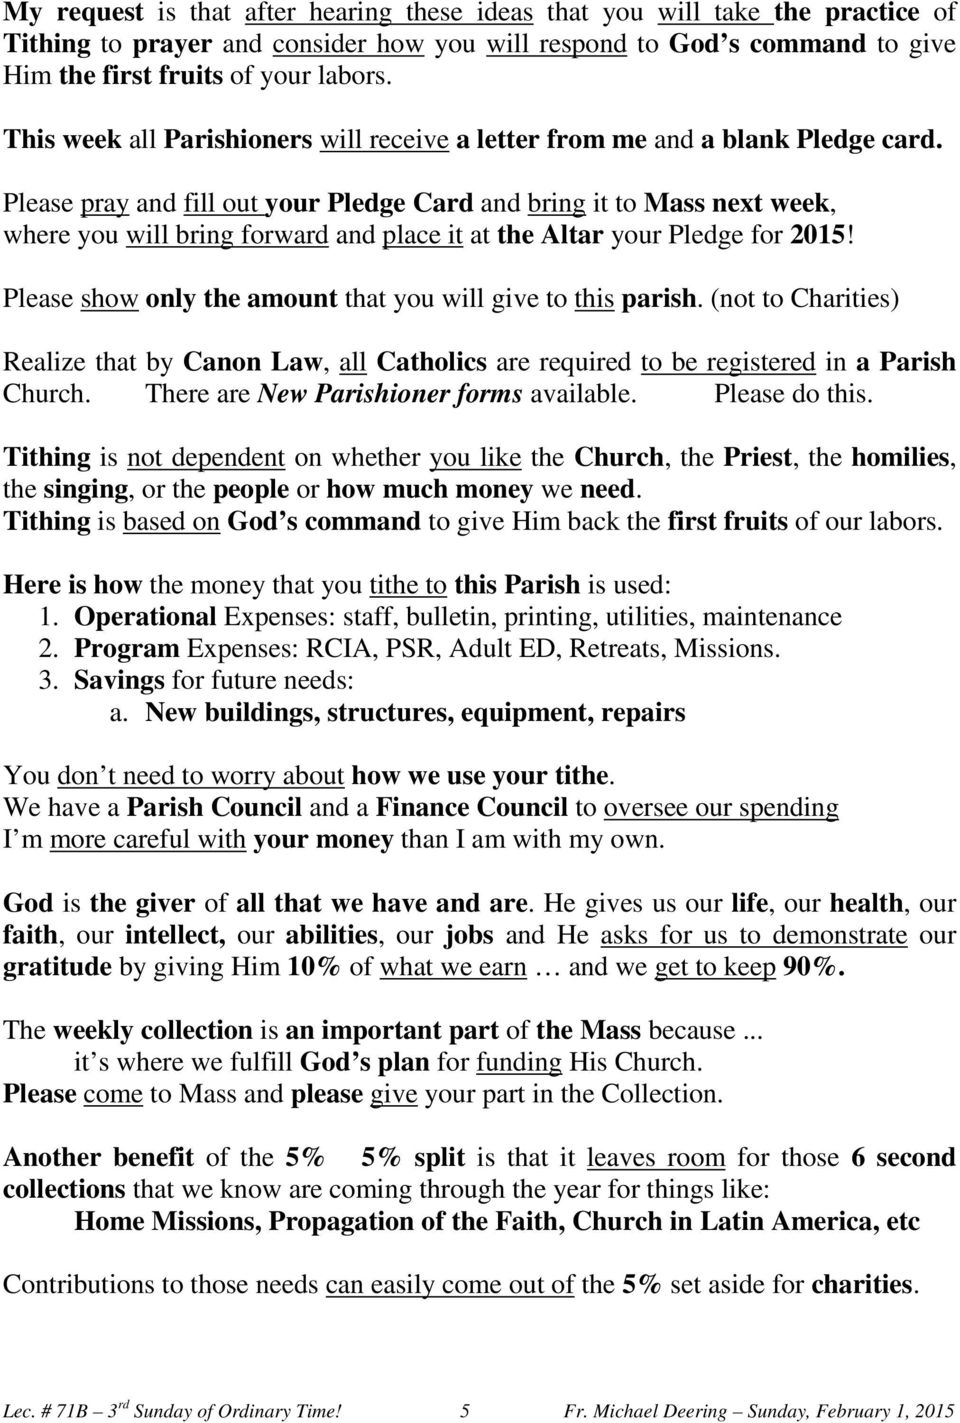 Please pray and fill out your Pledge Card and bring it to Mass next week, where you will bring forward and place it at the Altar your Pledge for 2015!